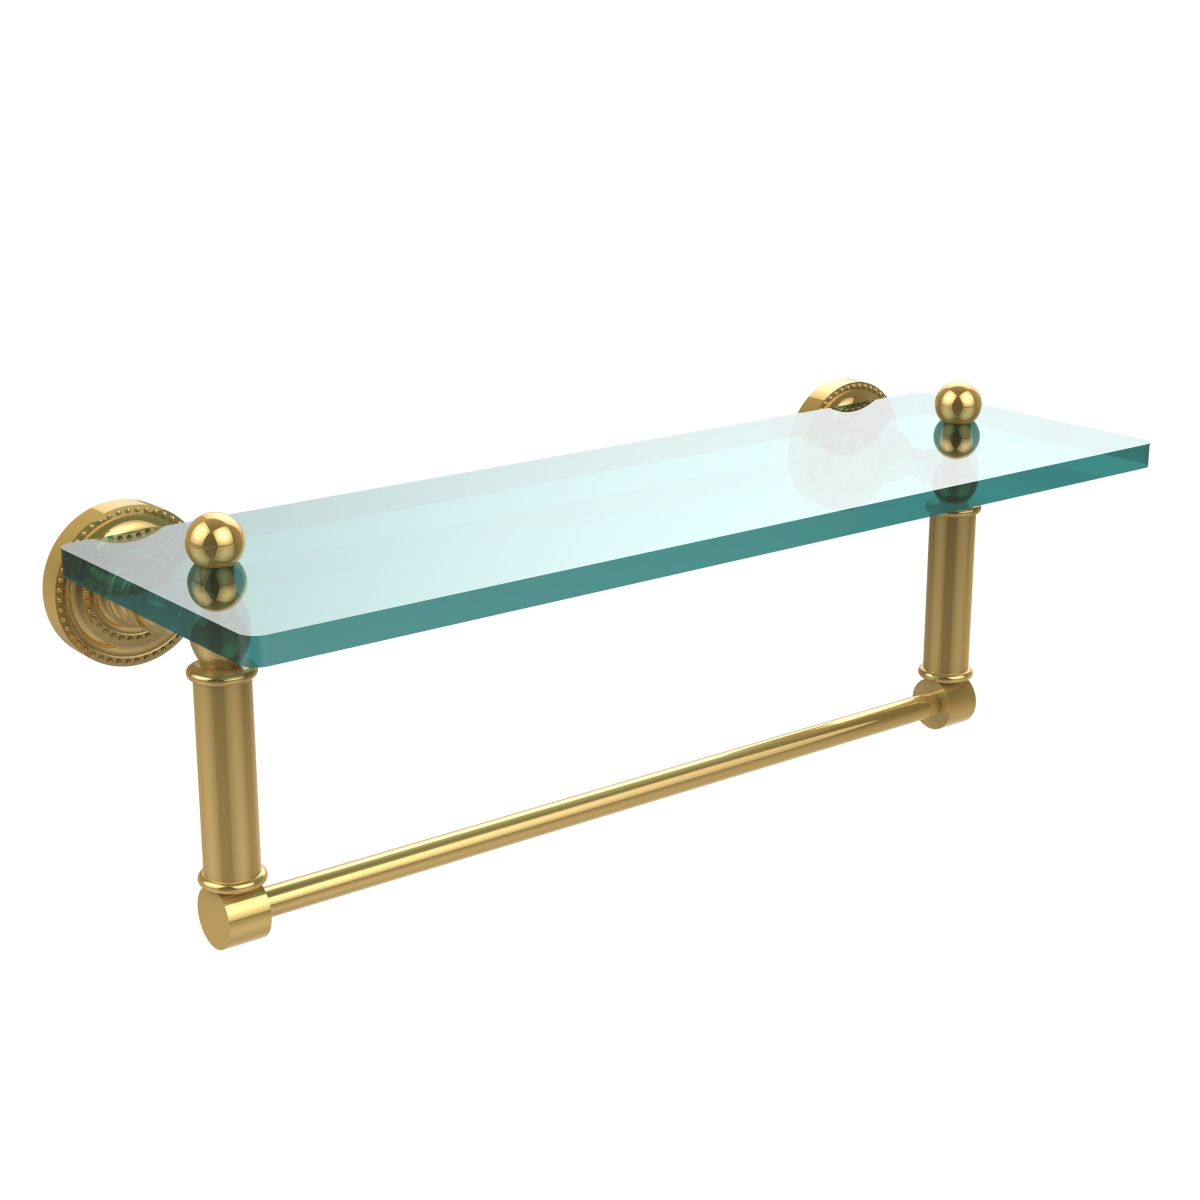 Picture of Allied Brass DT-1TB-16-PB 16 in. Dottingham Glass Vanity Shelf with Integrated Towel Bar, Polished Brass